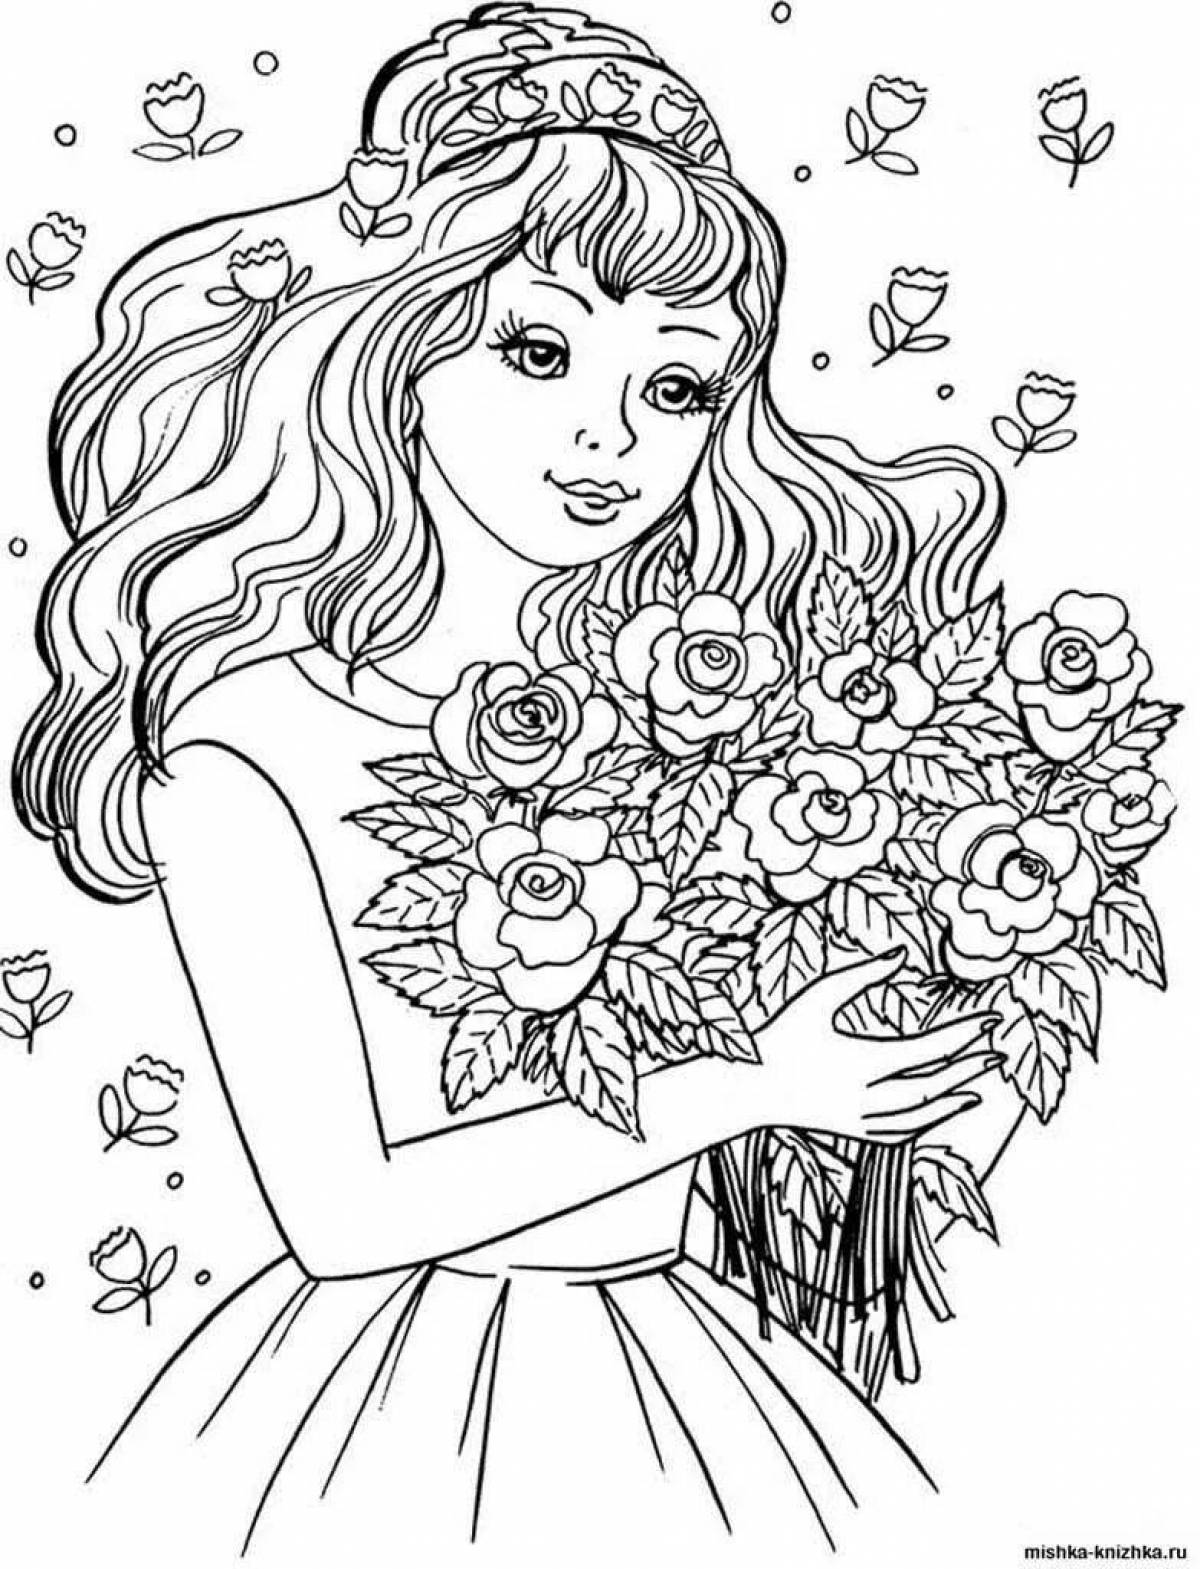 Majestic coloring book for girls 9-8 years old